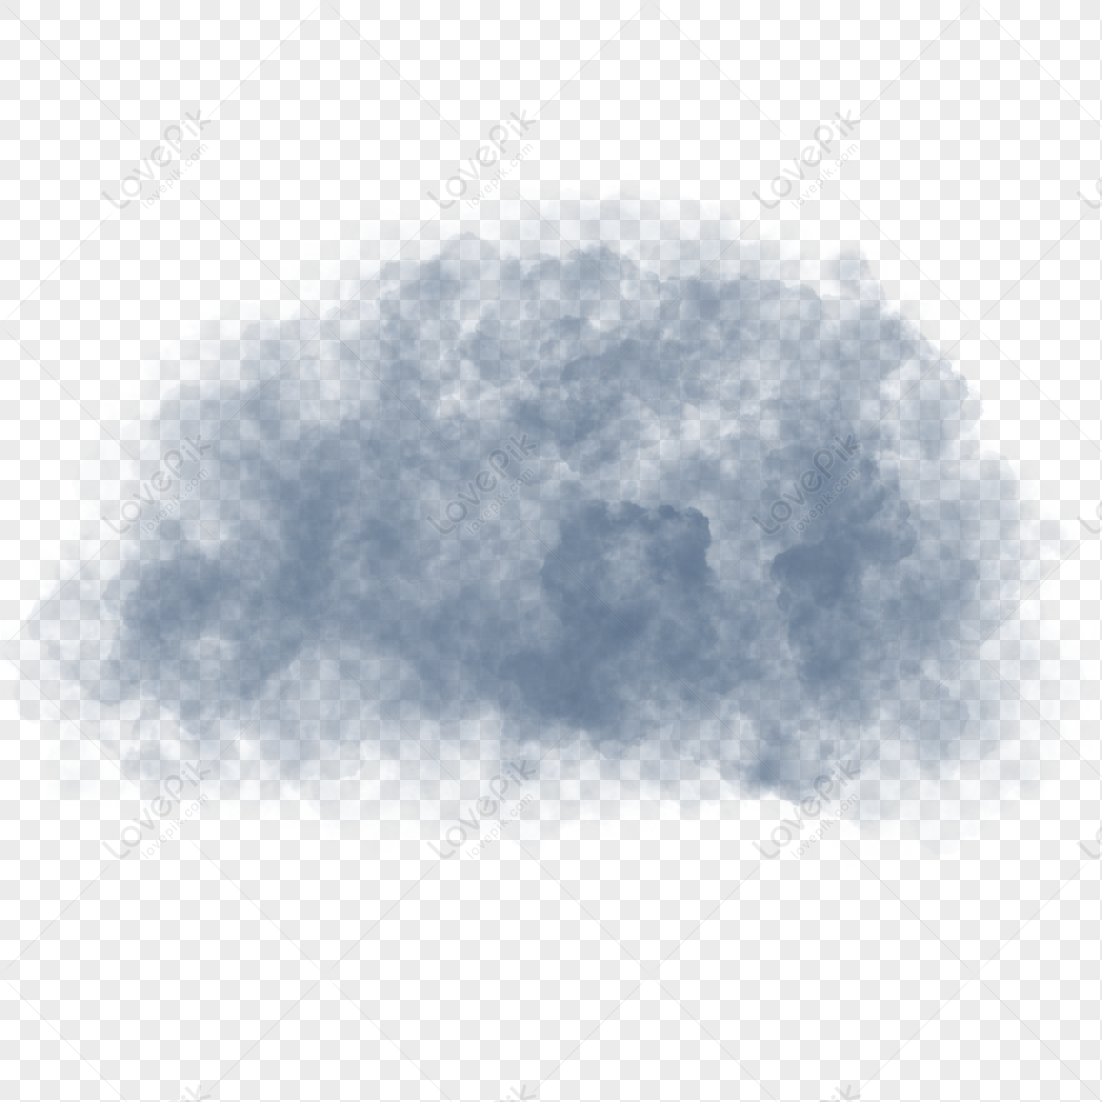 Dark Clouds PNG Picture And Clipart Image For Free Download - Lovepik |  401542305